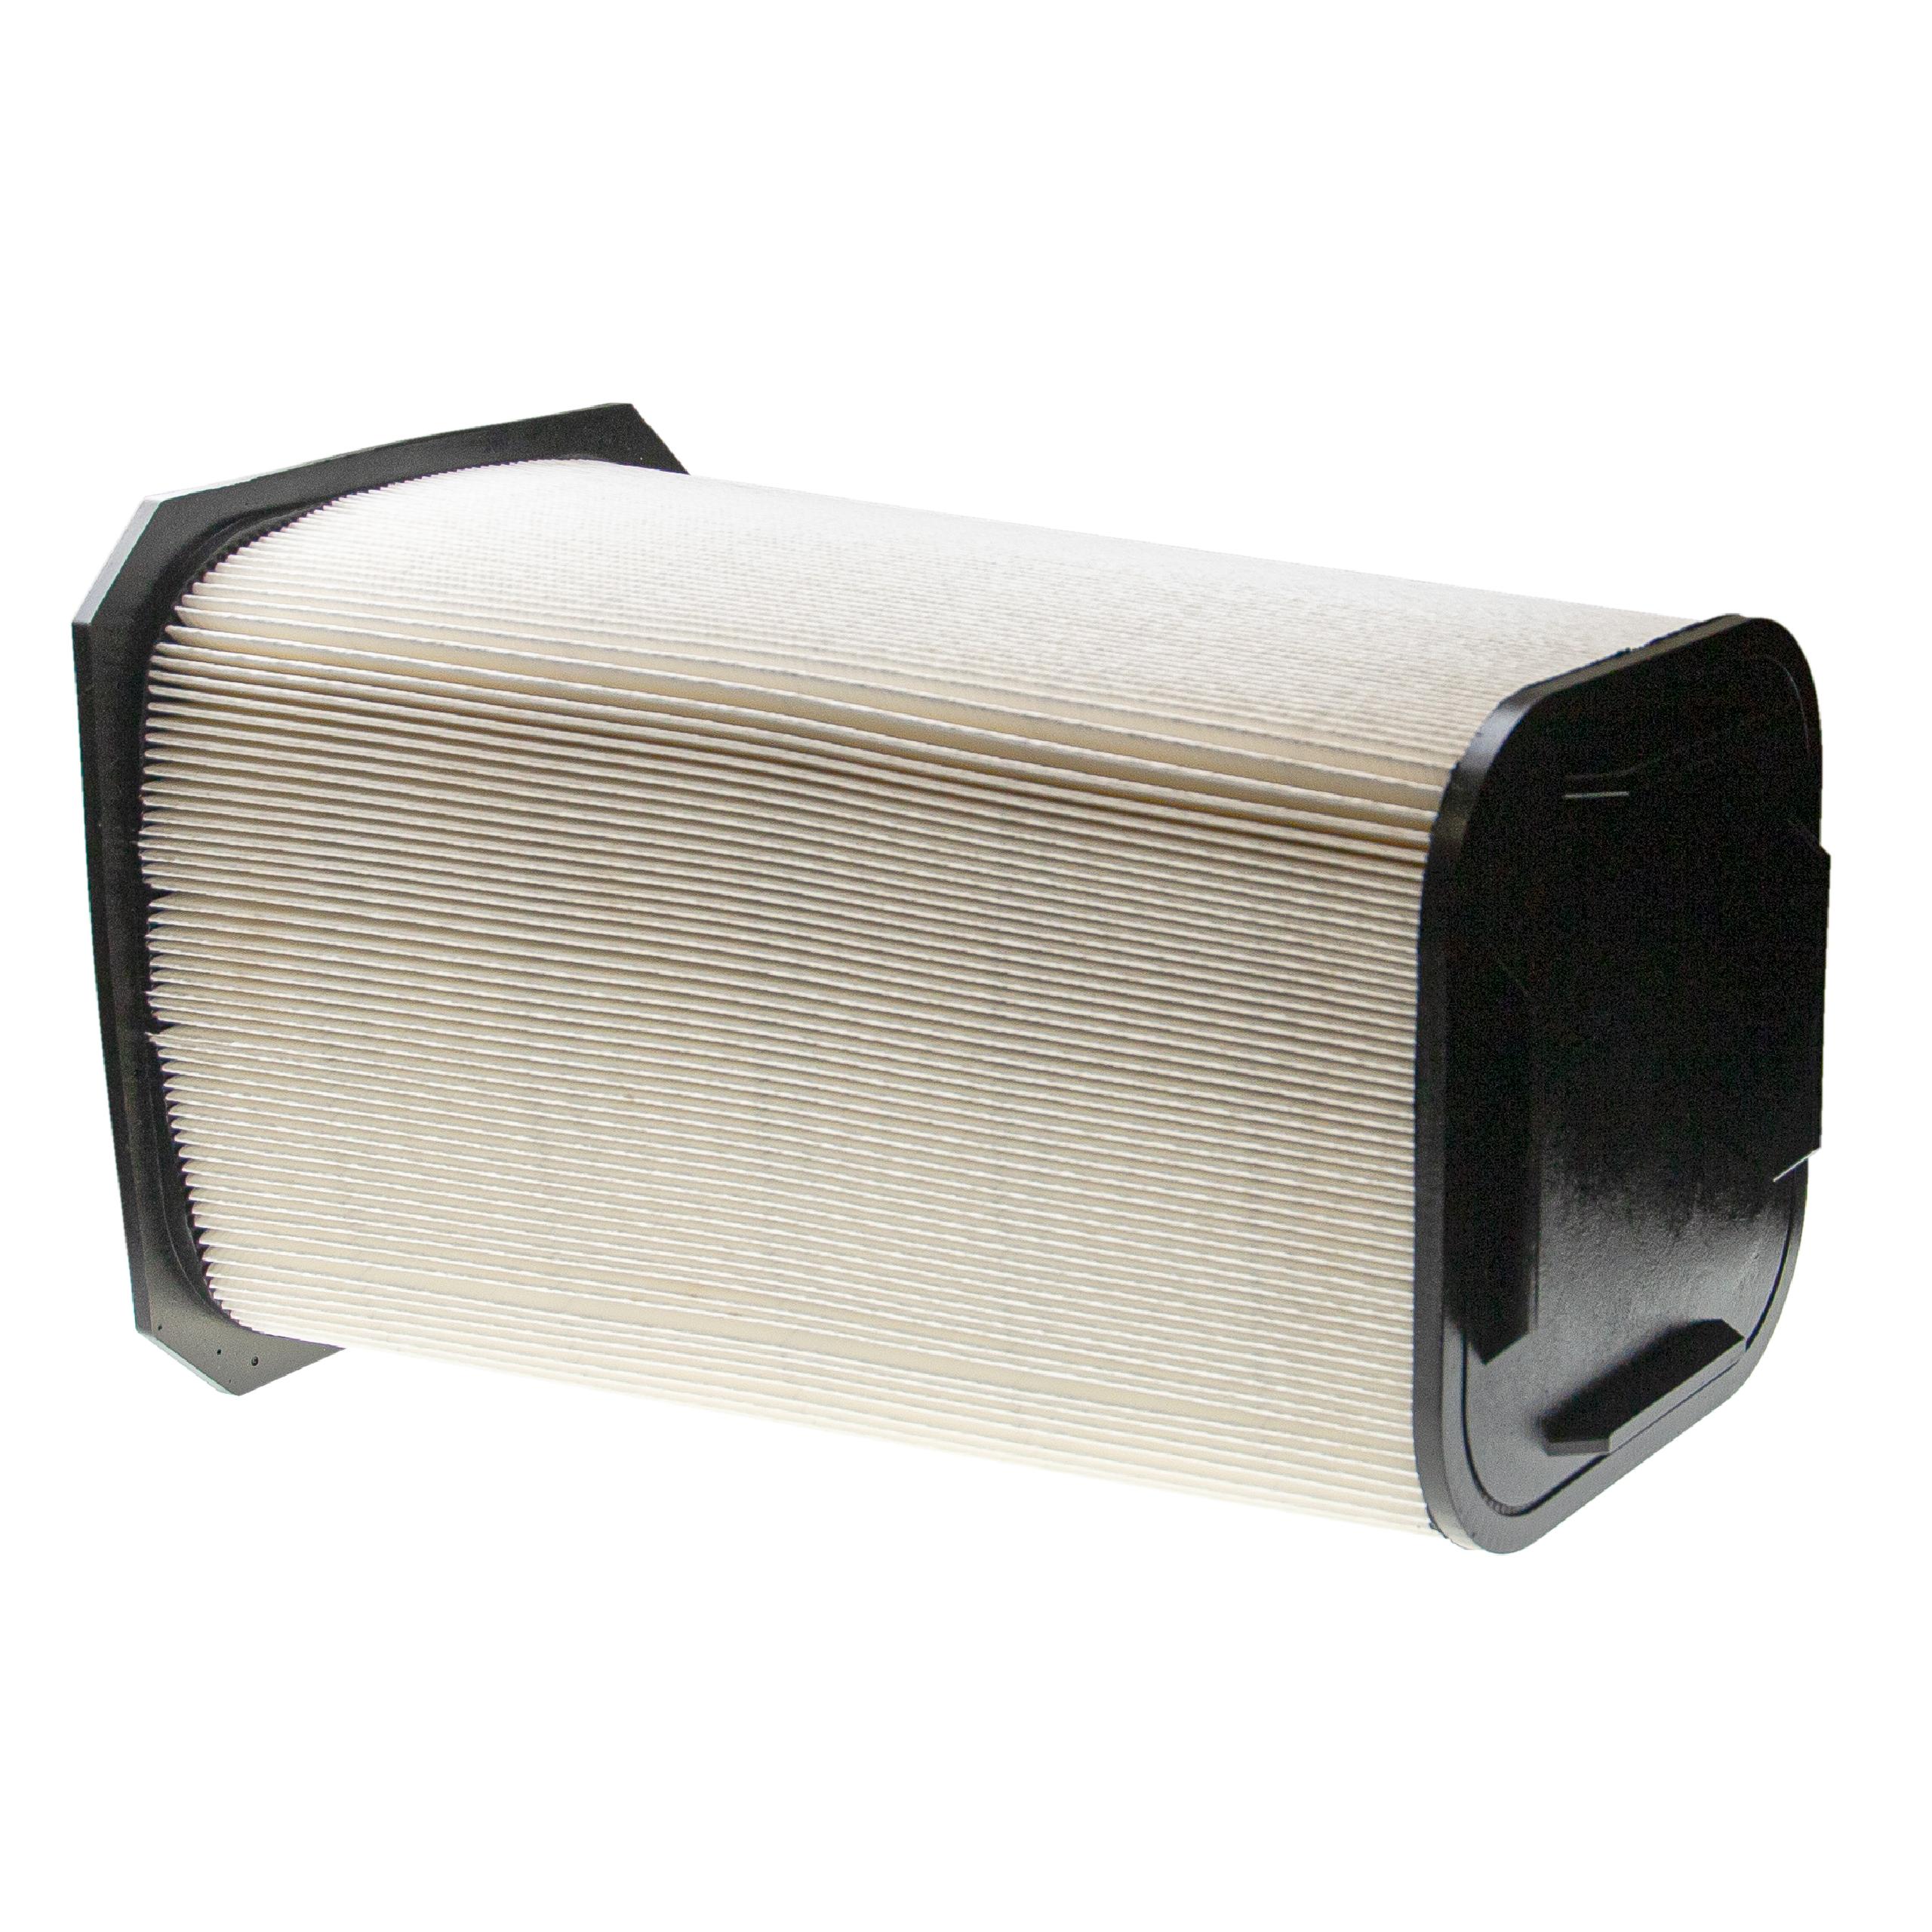 vhbw Micro-Filter Replacement for Dustcontrol 42896 for Air Cleaner - Air Filter Black White